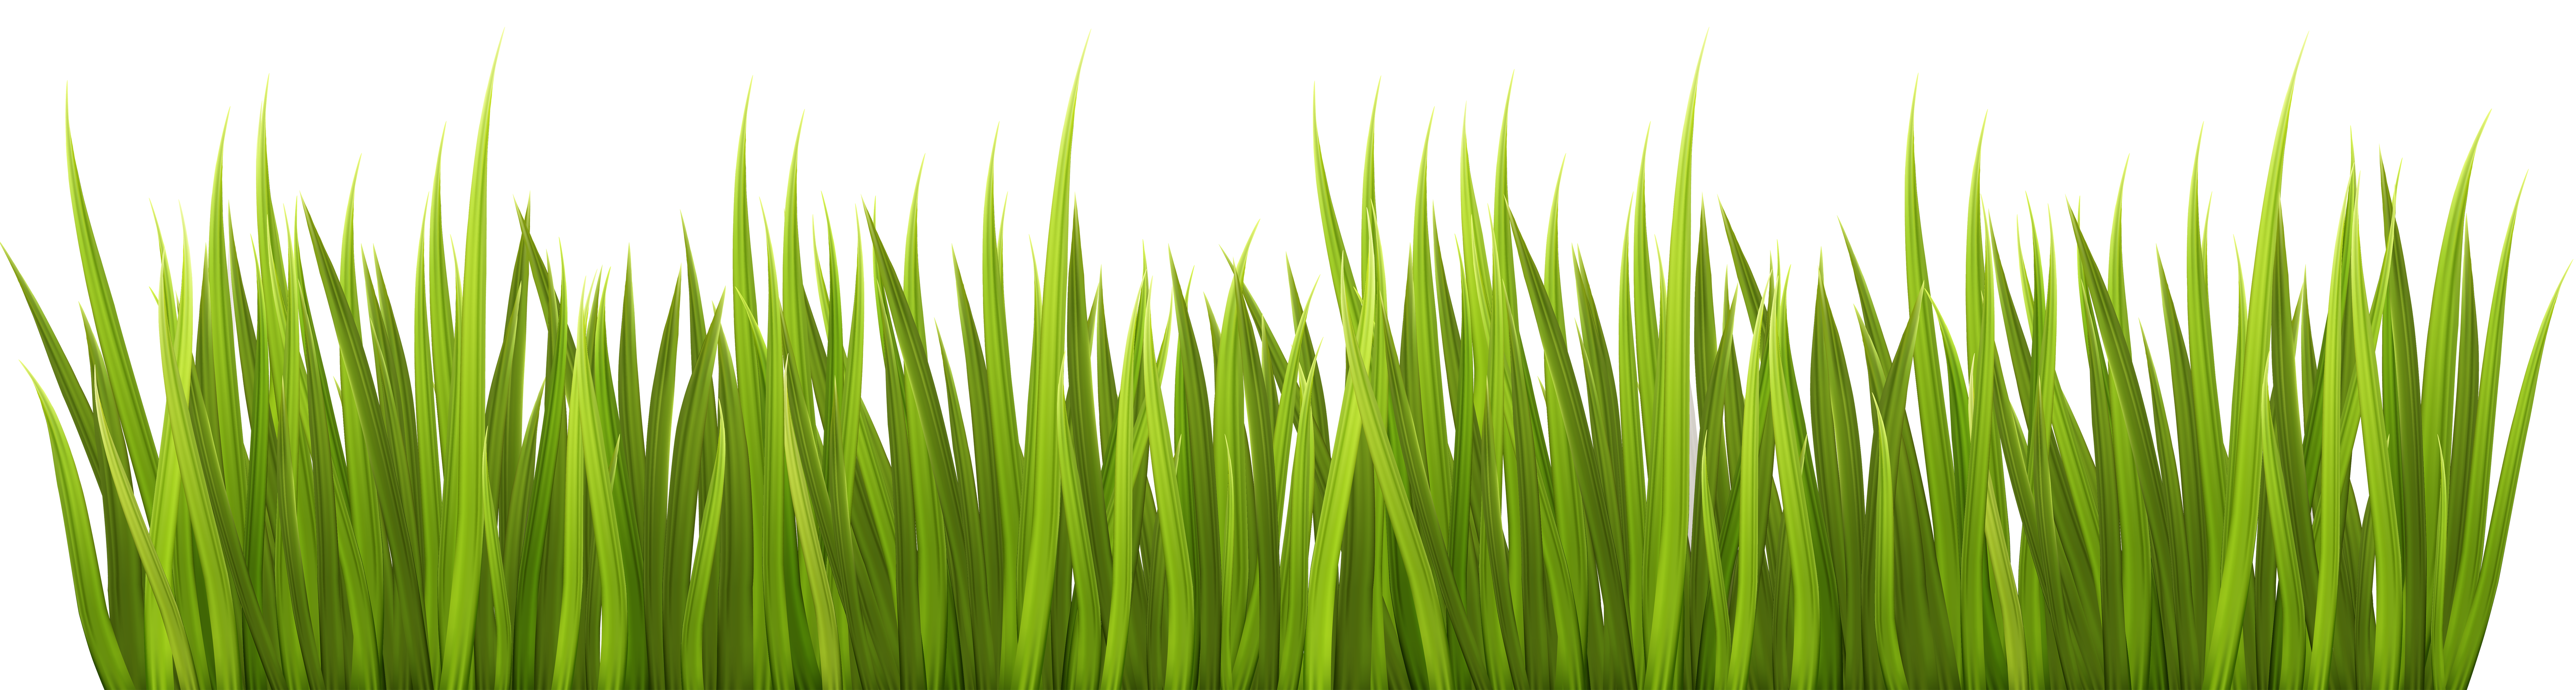 Grass Clipart Images - Free Download on Clipart LIbrary - Clip Art